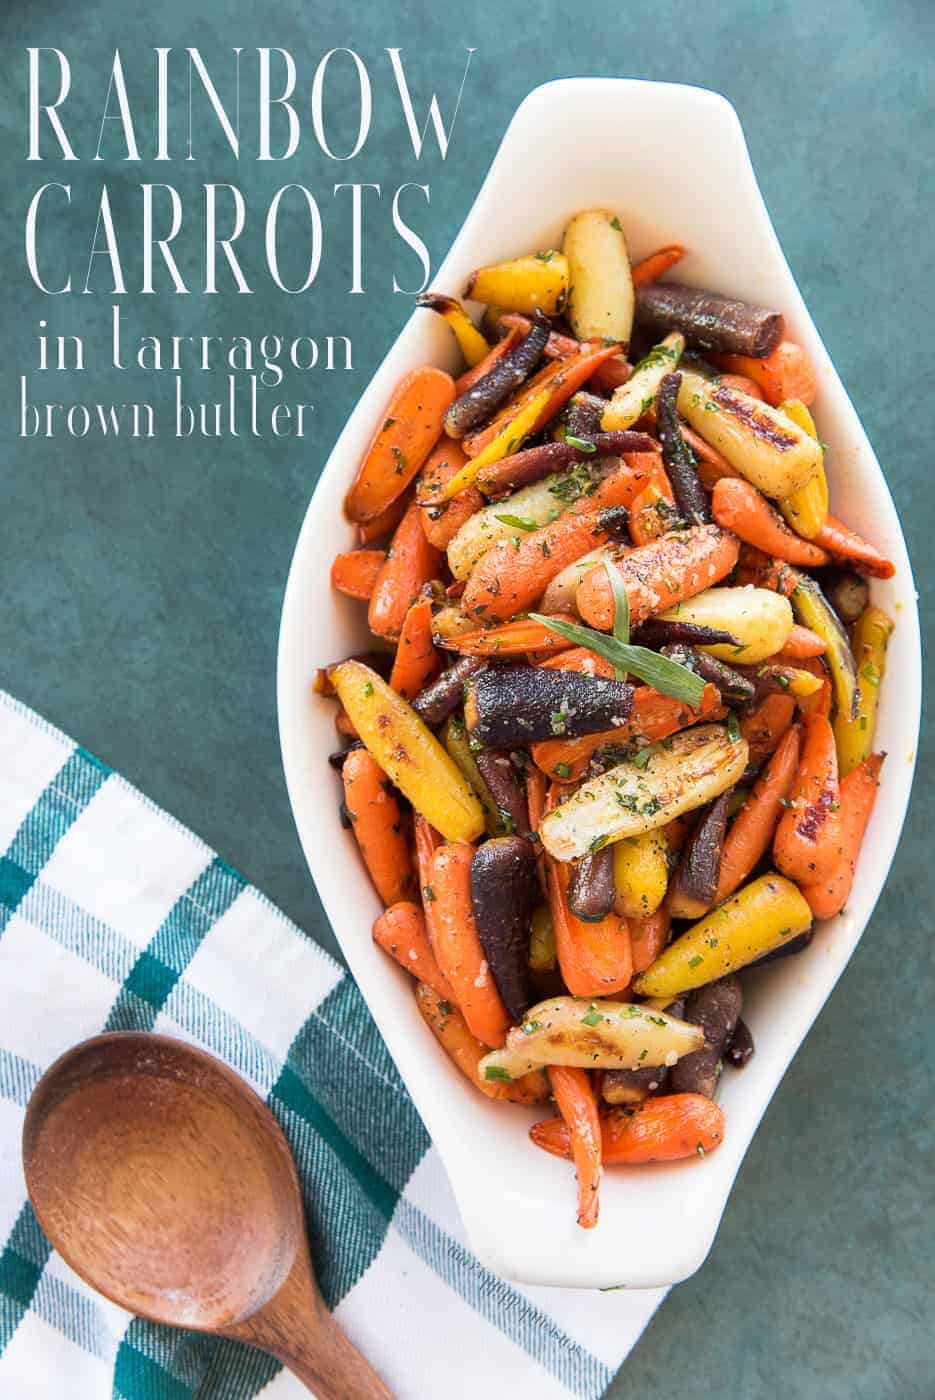 Make this easy side dish for your next Sunday or Holiday Dinner. Colorful rainbow carrots are roasted until tender, then tossed in a nutty, tarragon butter sauce. It's simple and delicious. #carrots #babycarrots #carrotrecipe #tarragon #freshherbs #roastedvegetables #roastedcarrots #holidaysides #holidaysidedish #sidedish #holidayrecipe #Easter #thanksgiving #Christmas #zanahorias #nochebuena #cooking #accompaniments  via @ediblesense